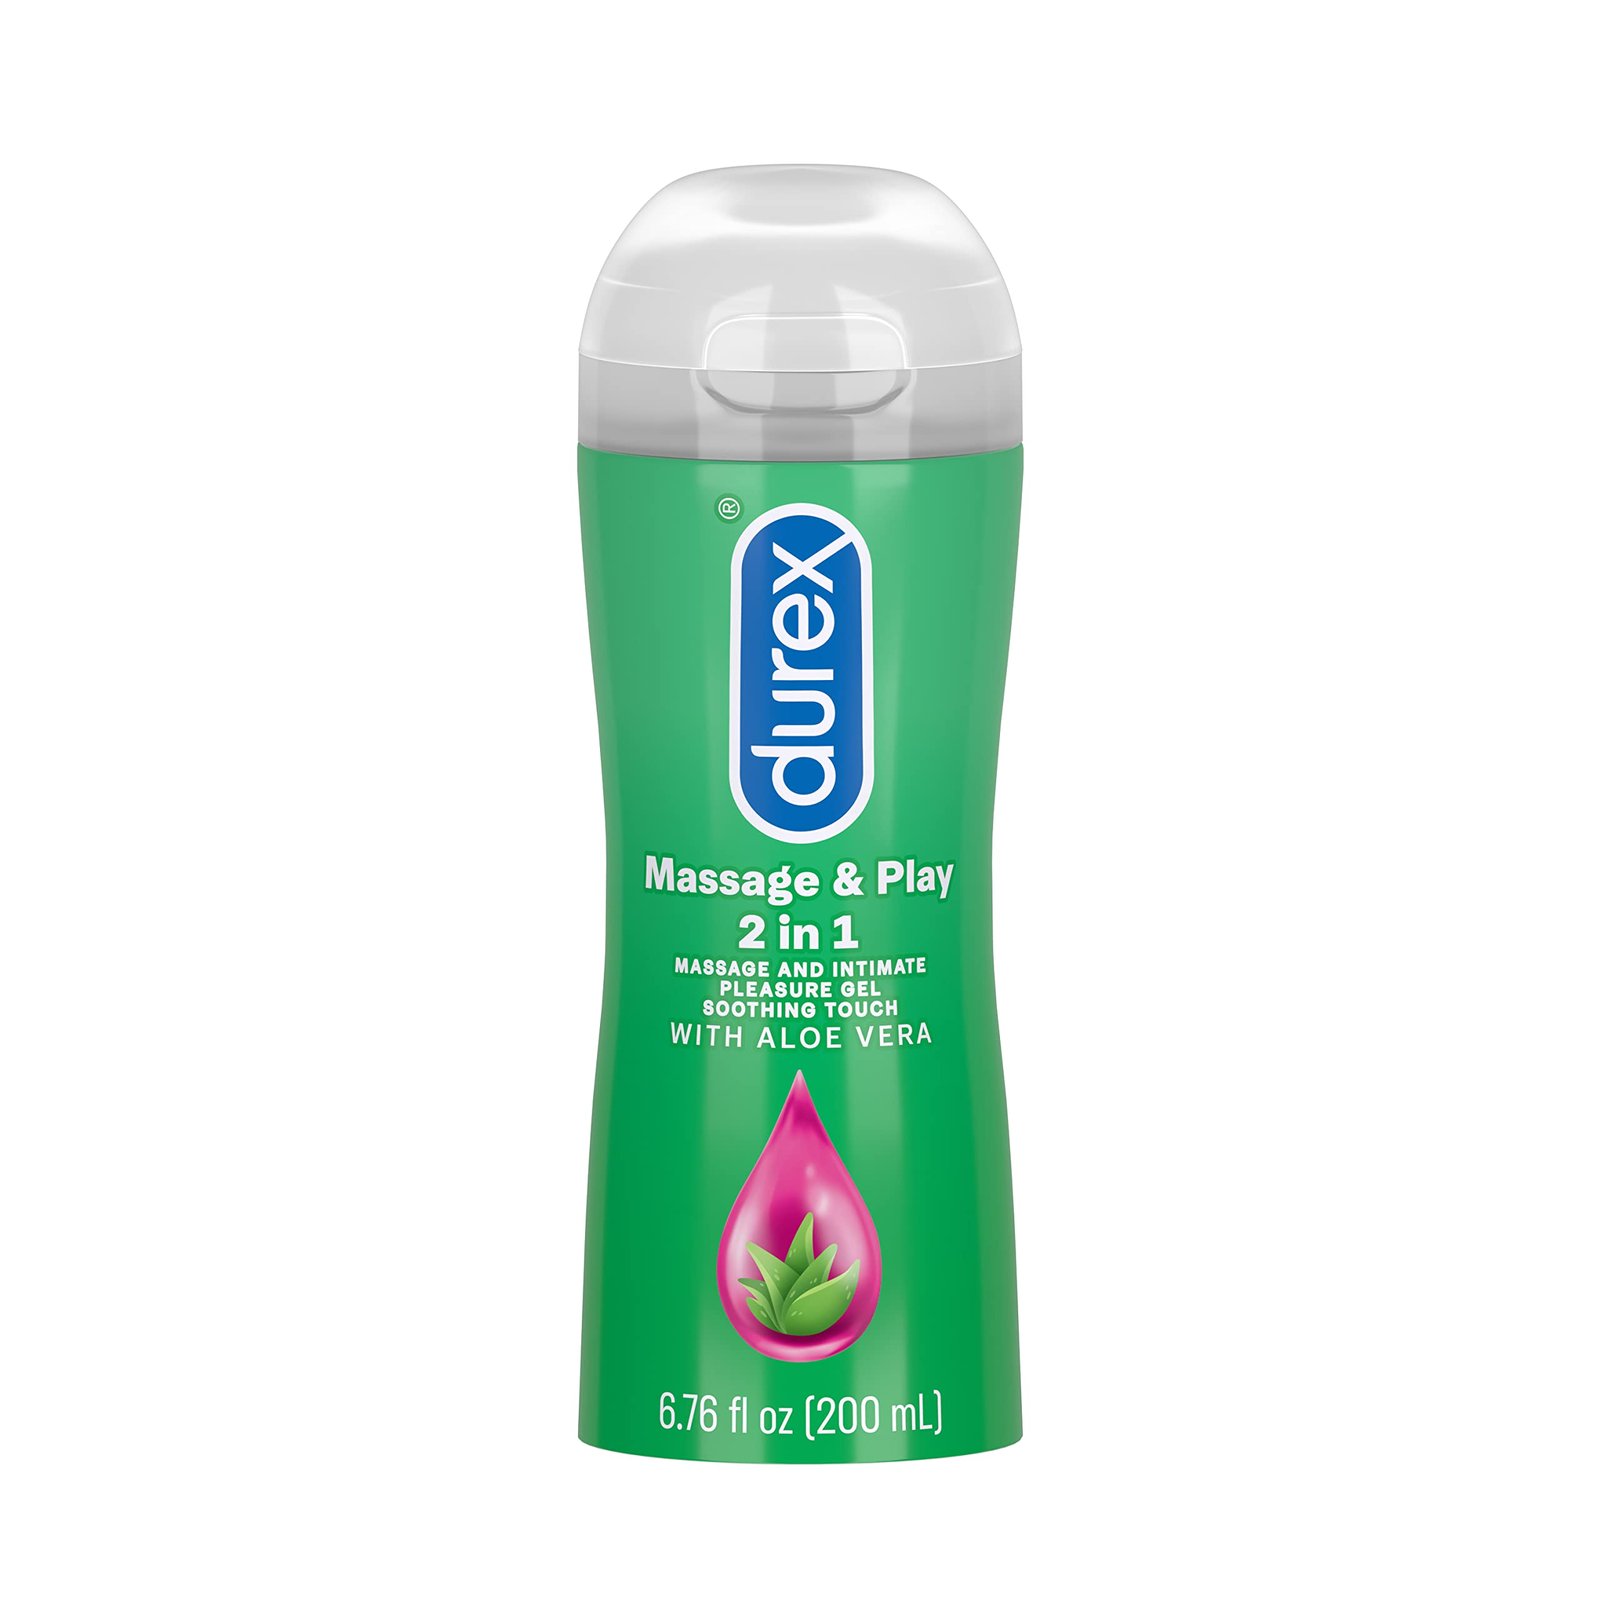 Buy Durex Massage & Play 2 In 1 Lubricant Gel In Pakistan at Rs. 2600 from Likeshop.pk